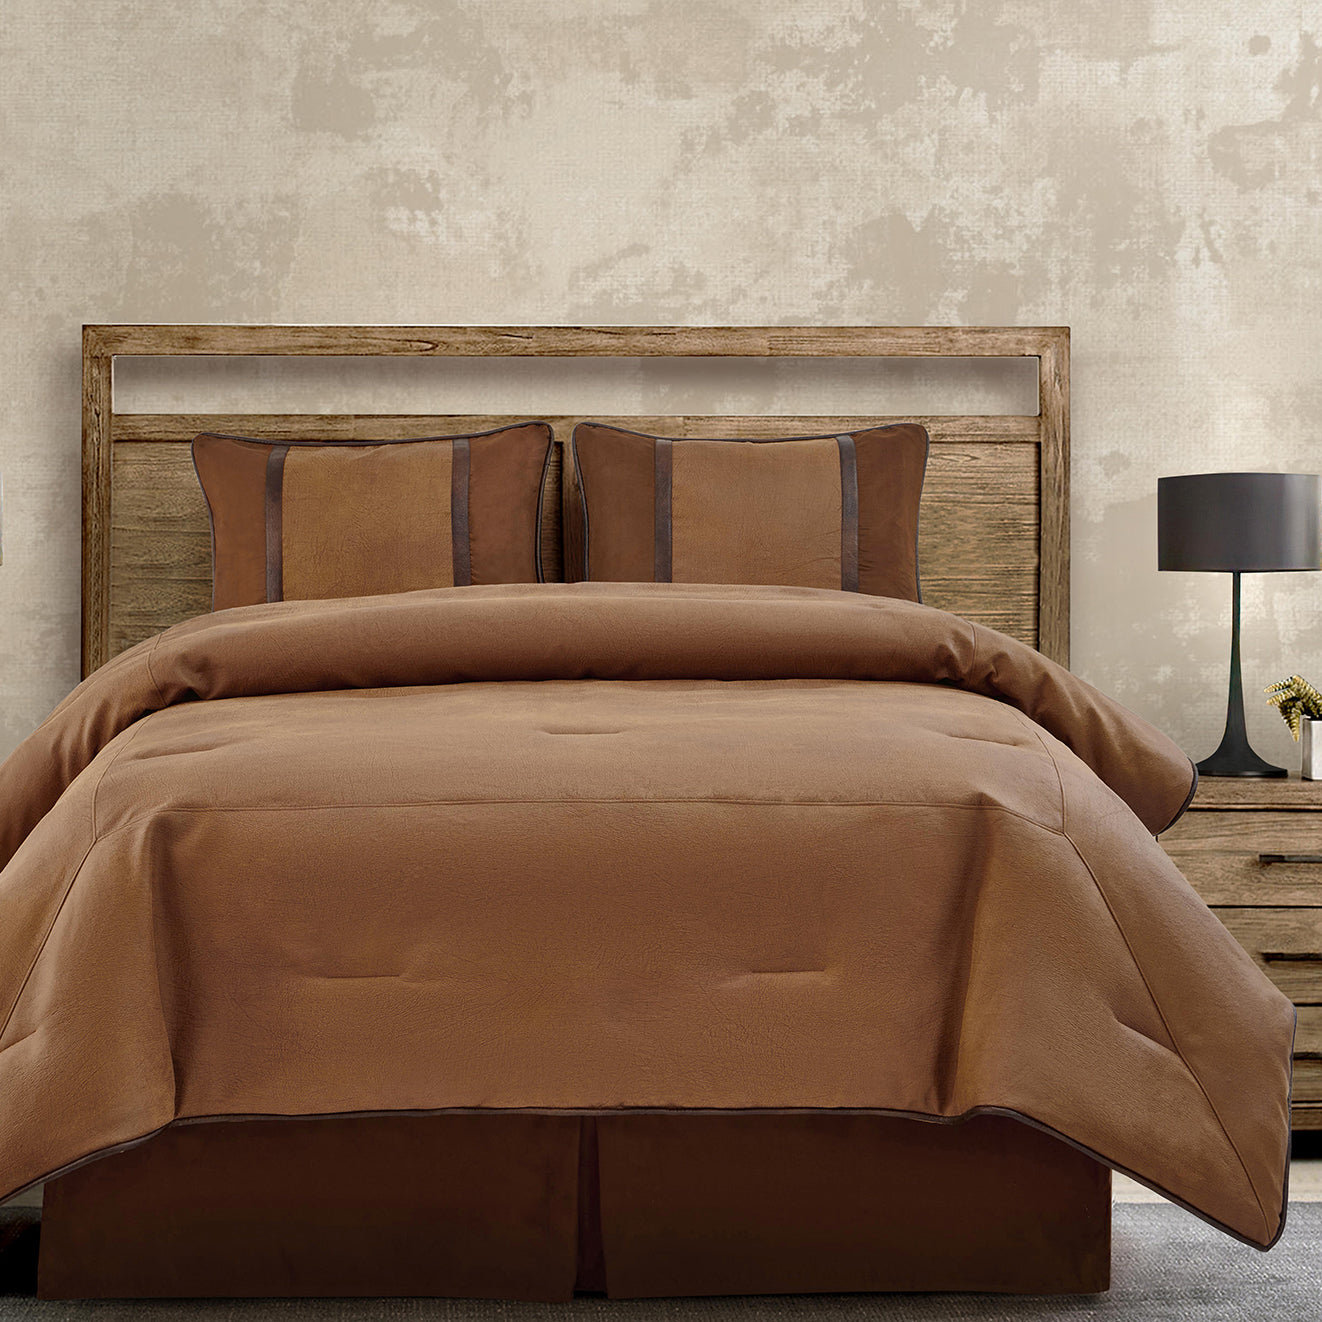 Into the Wilderness Faux Leather Sheets